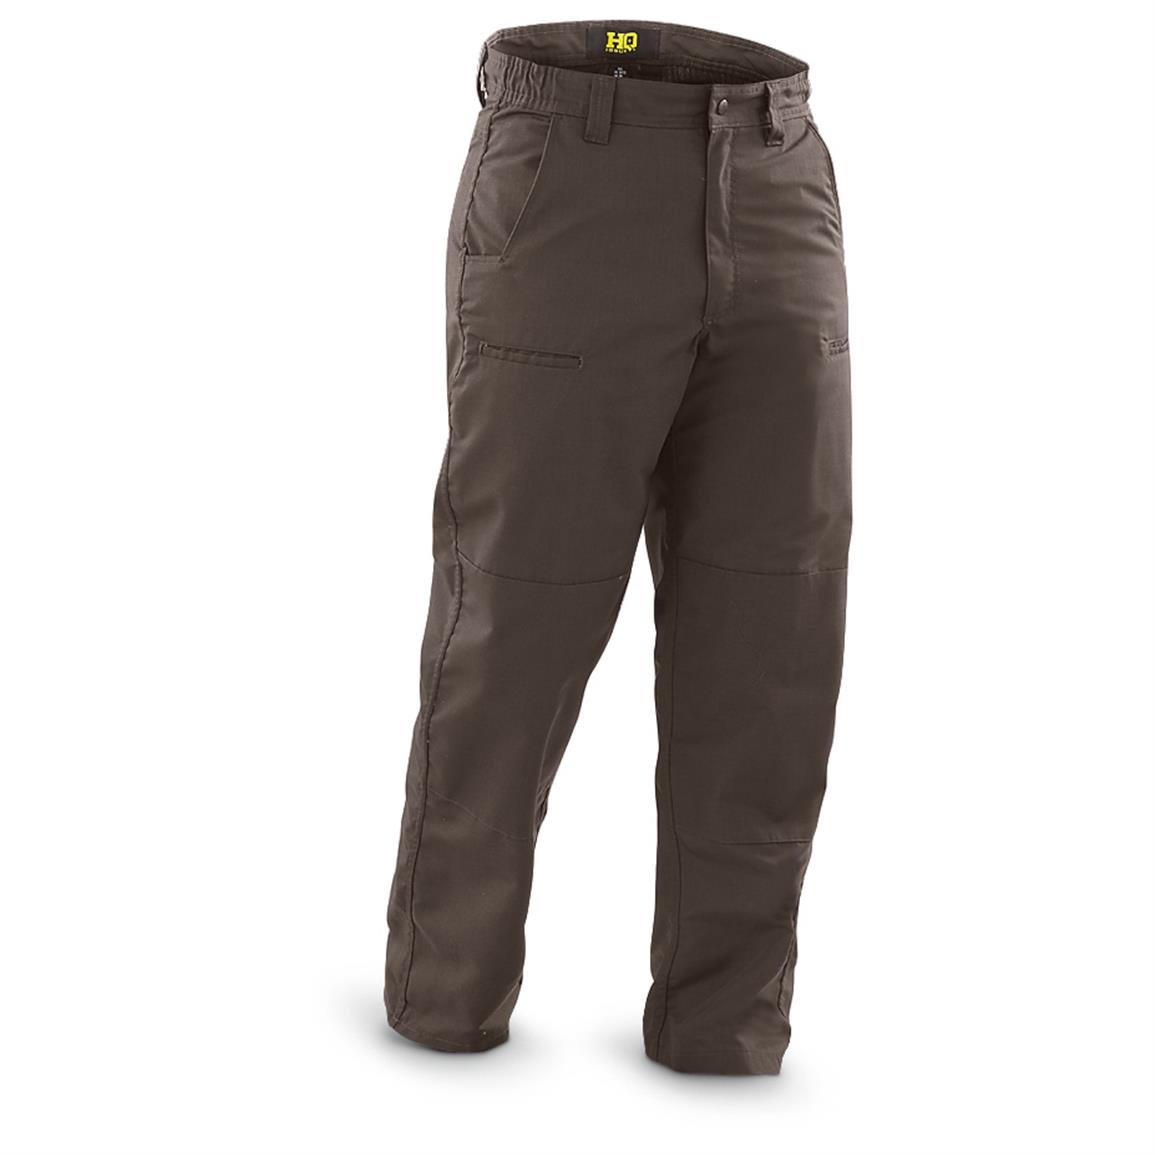 HQ ISSUE Men's Ripstop Tactical Pants - 592330, Tactical Clothing at ...